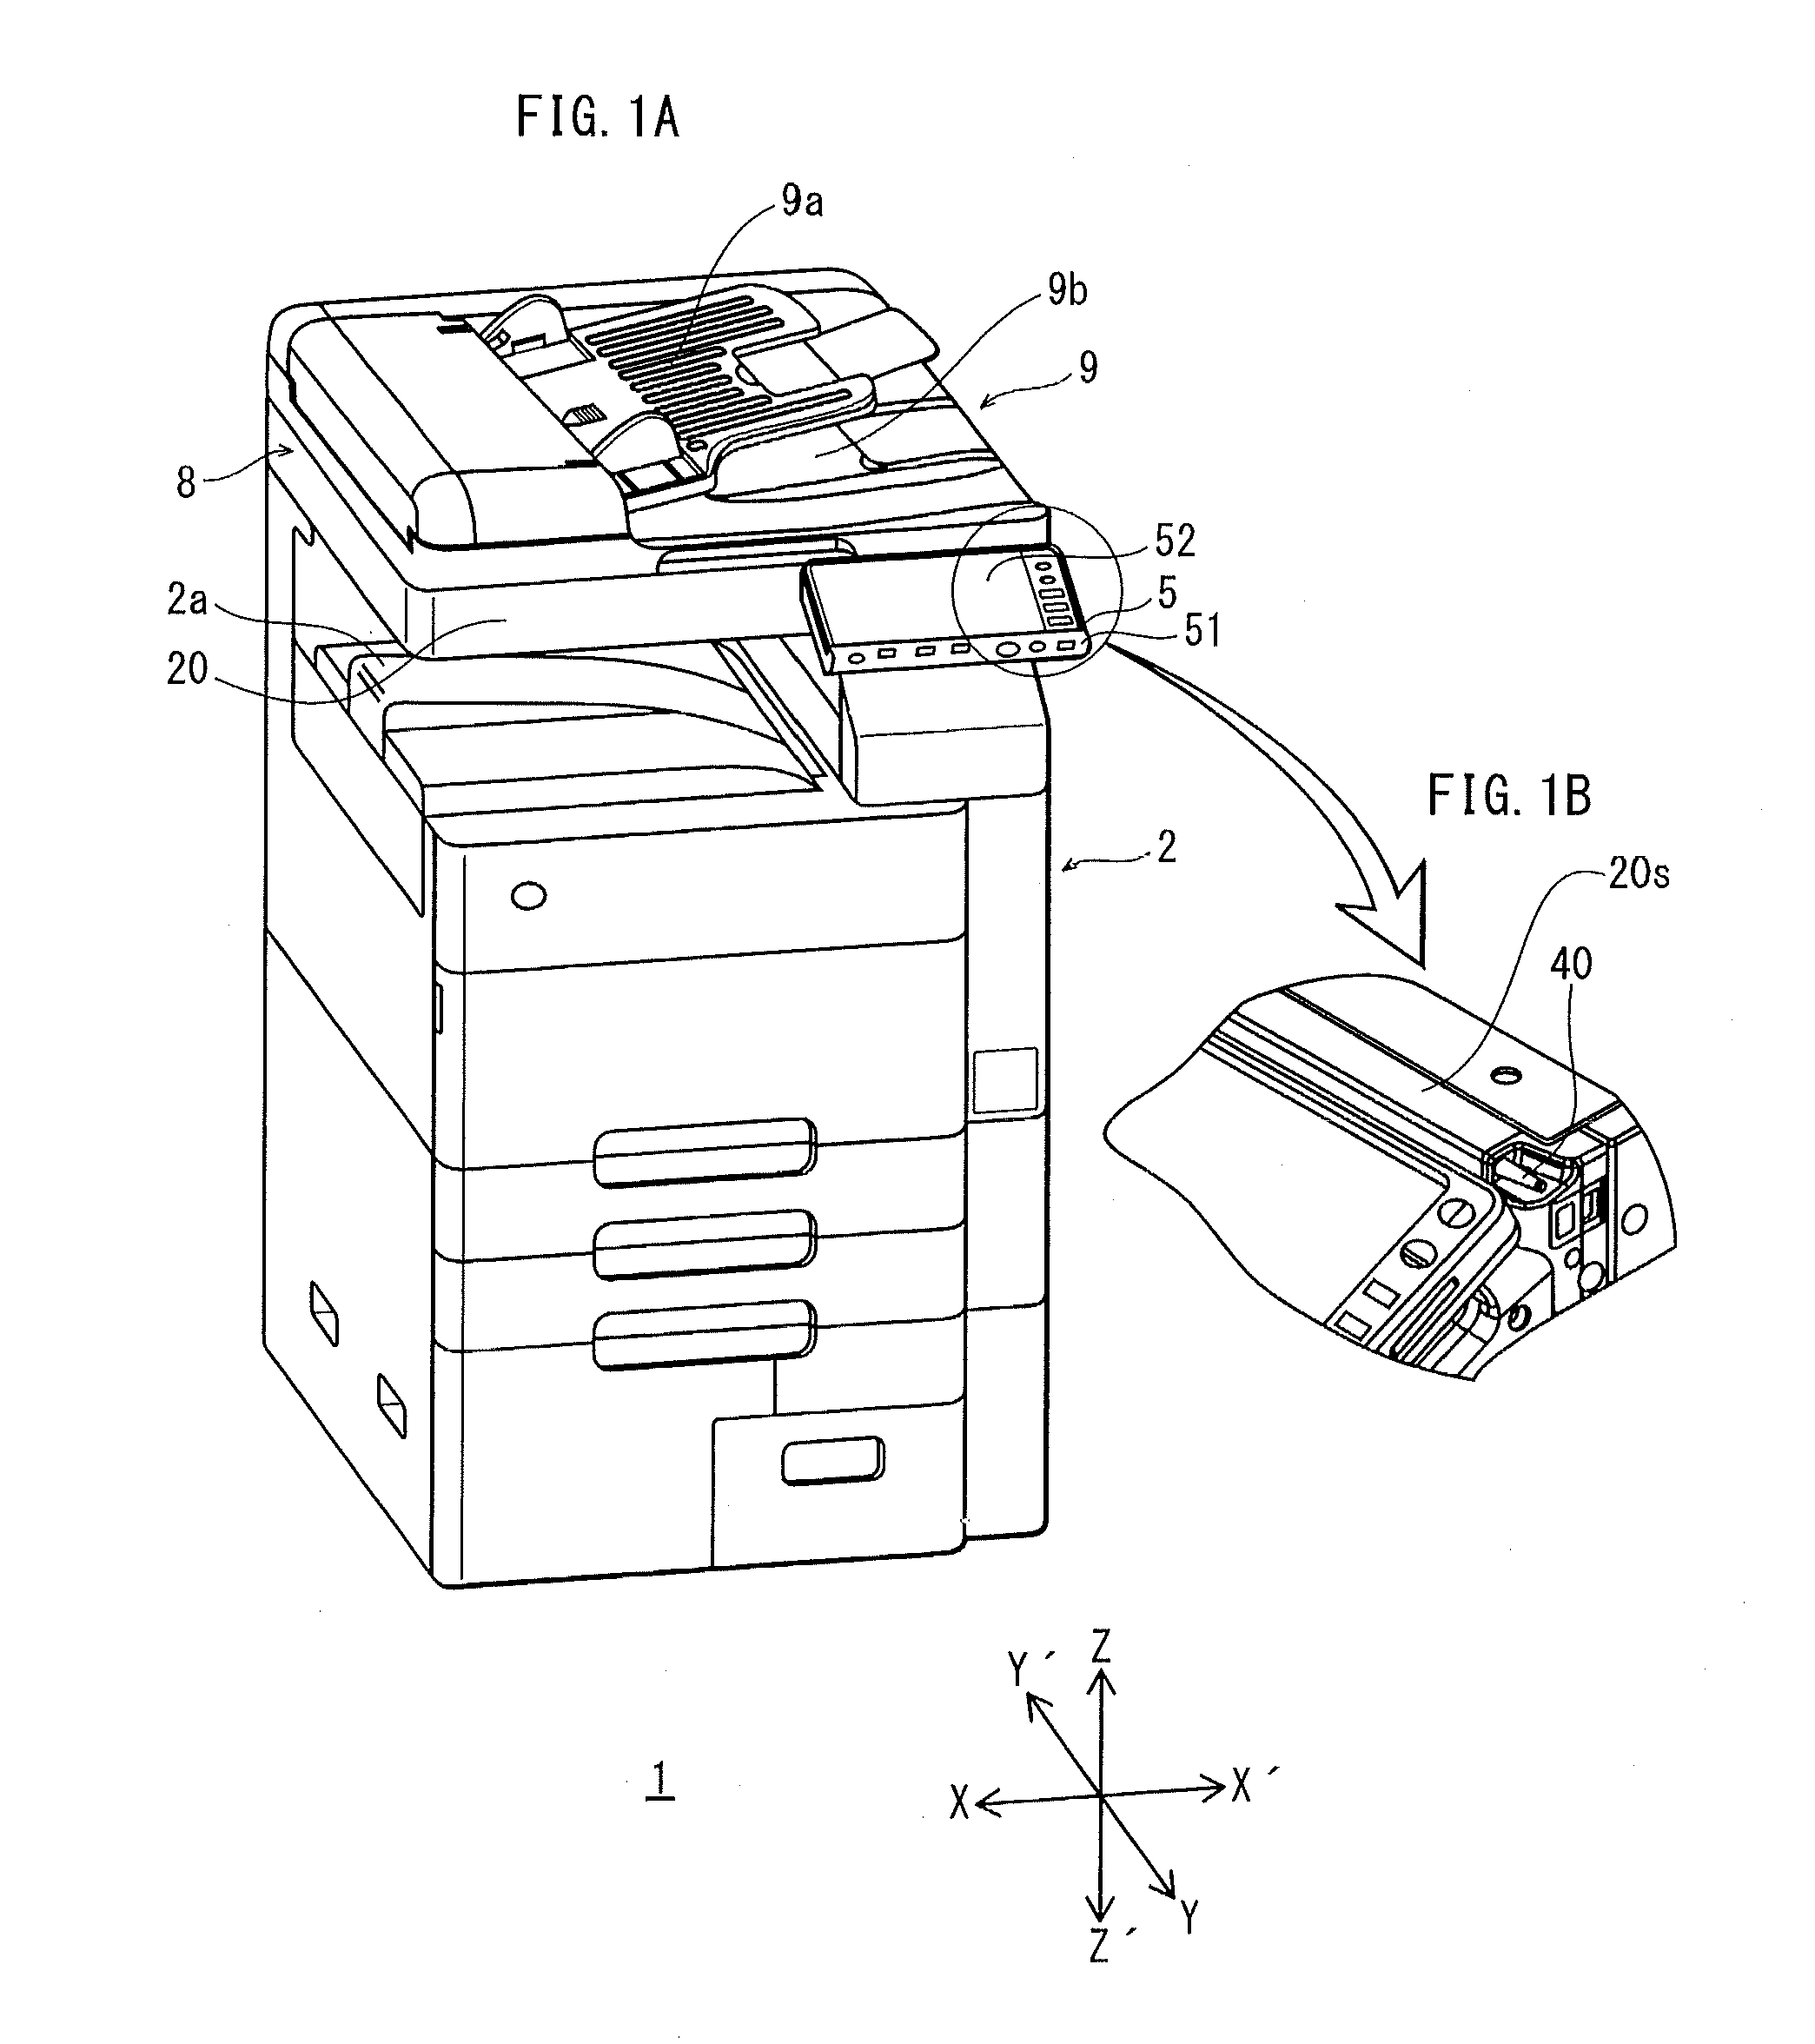 Image forming apparatus storing a stylus pen